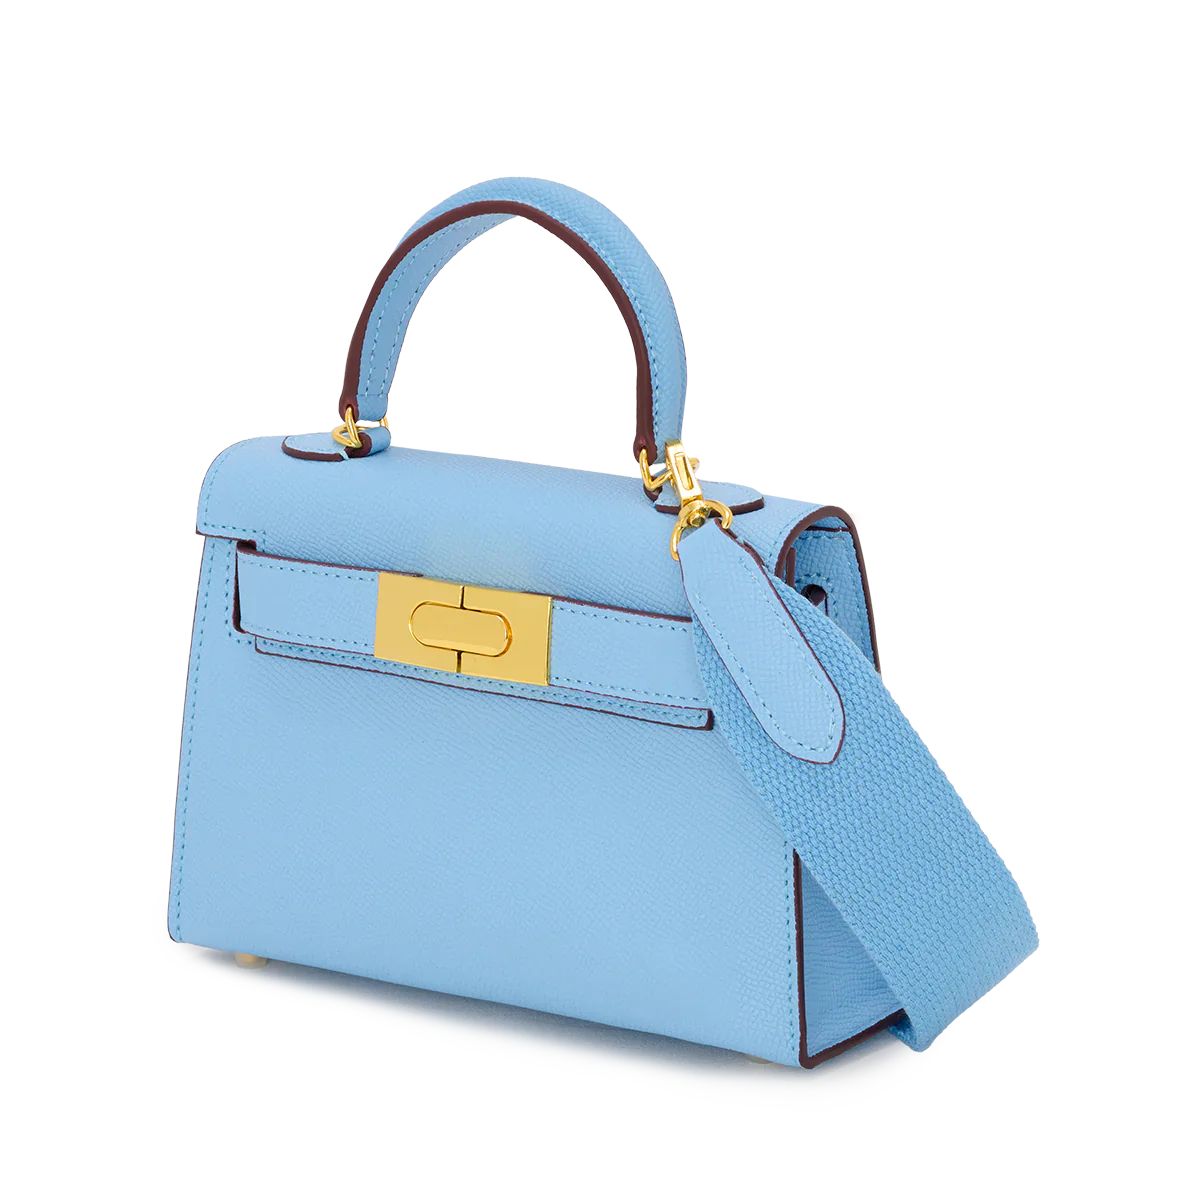 Lily and Bean Evie Leather Bag Glacier Blue PRE ORDER 3 WEEKS | Lily and Bean